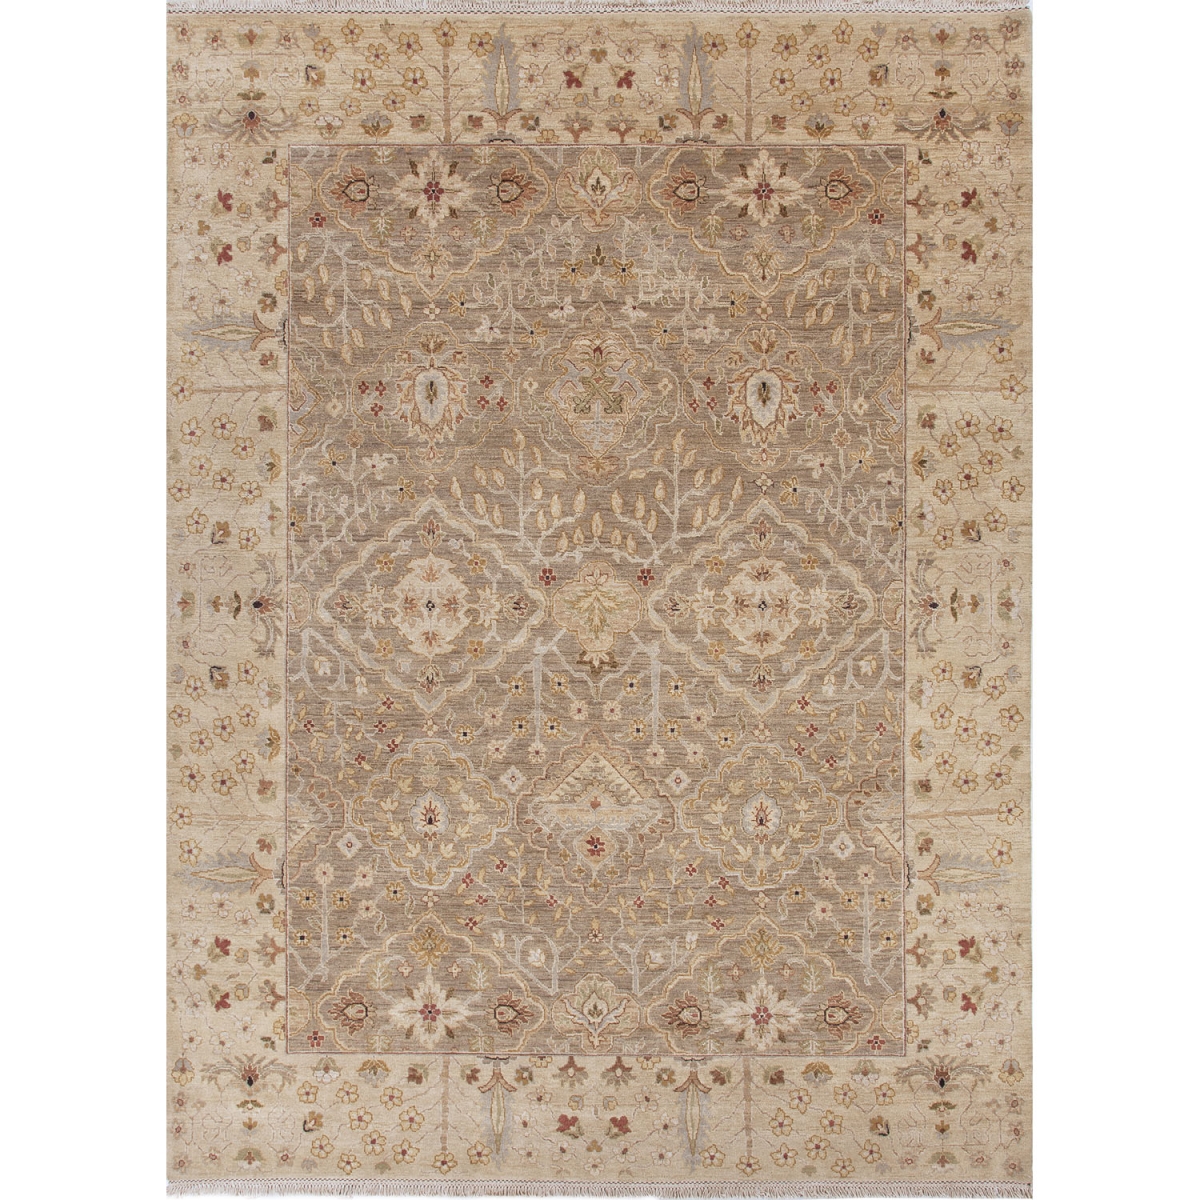 Rug103305 12 X 15 Ft. Opus Allegro Hand-knotted Floral Cream & Maroon Area Rug